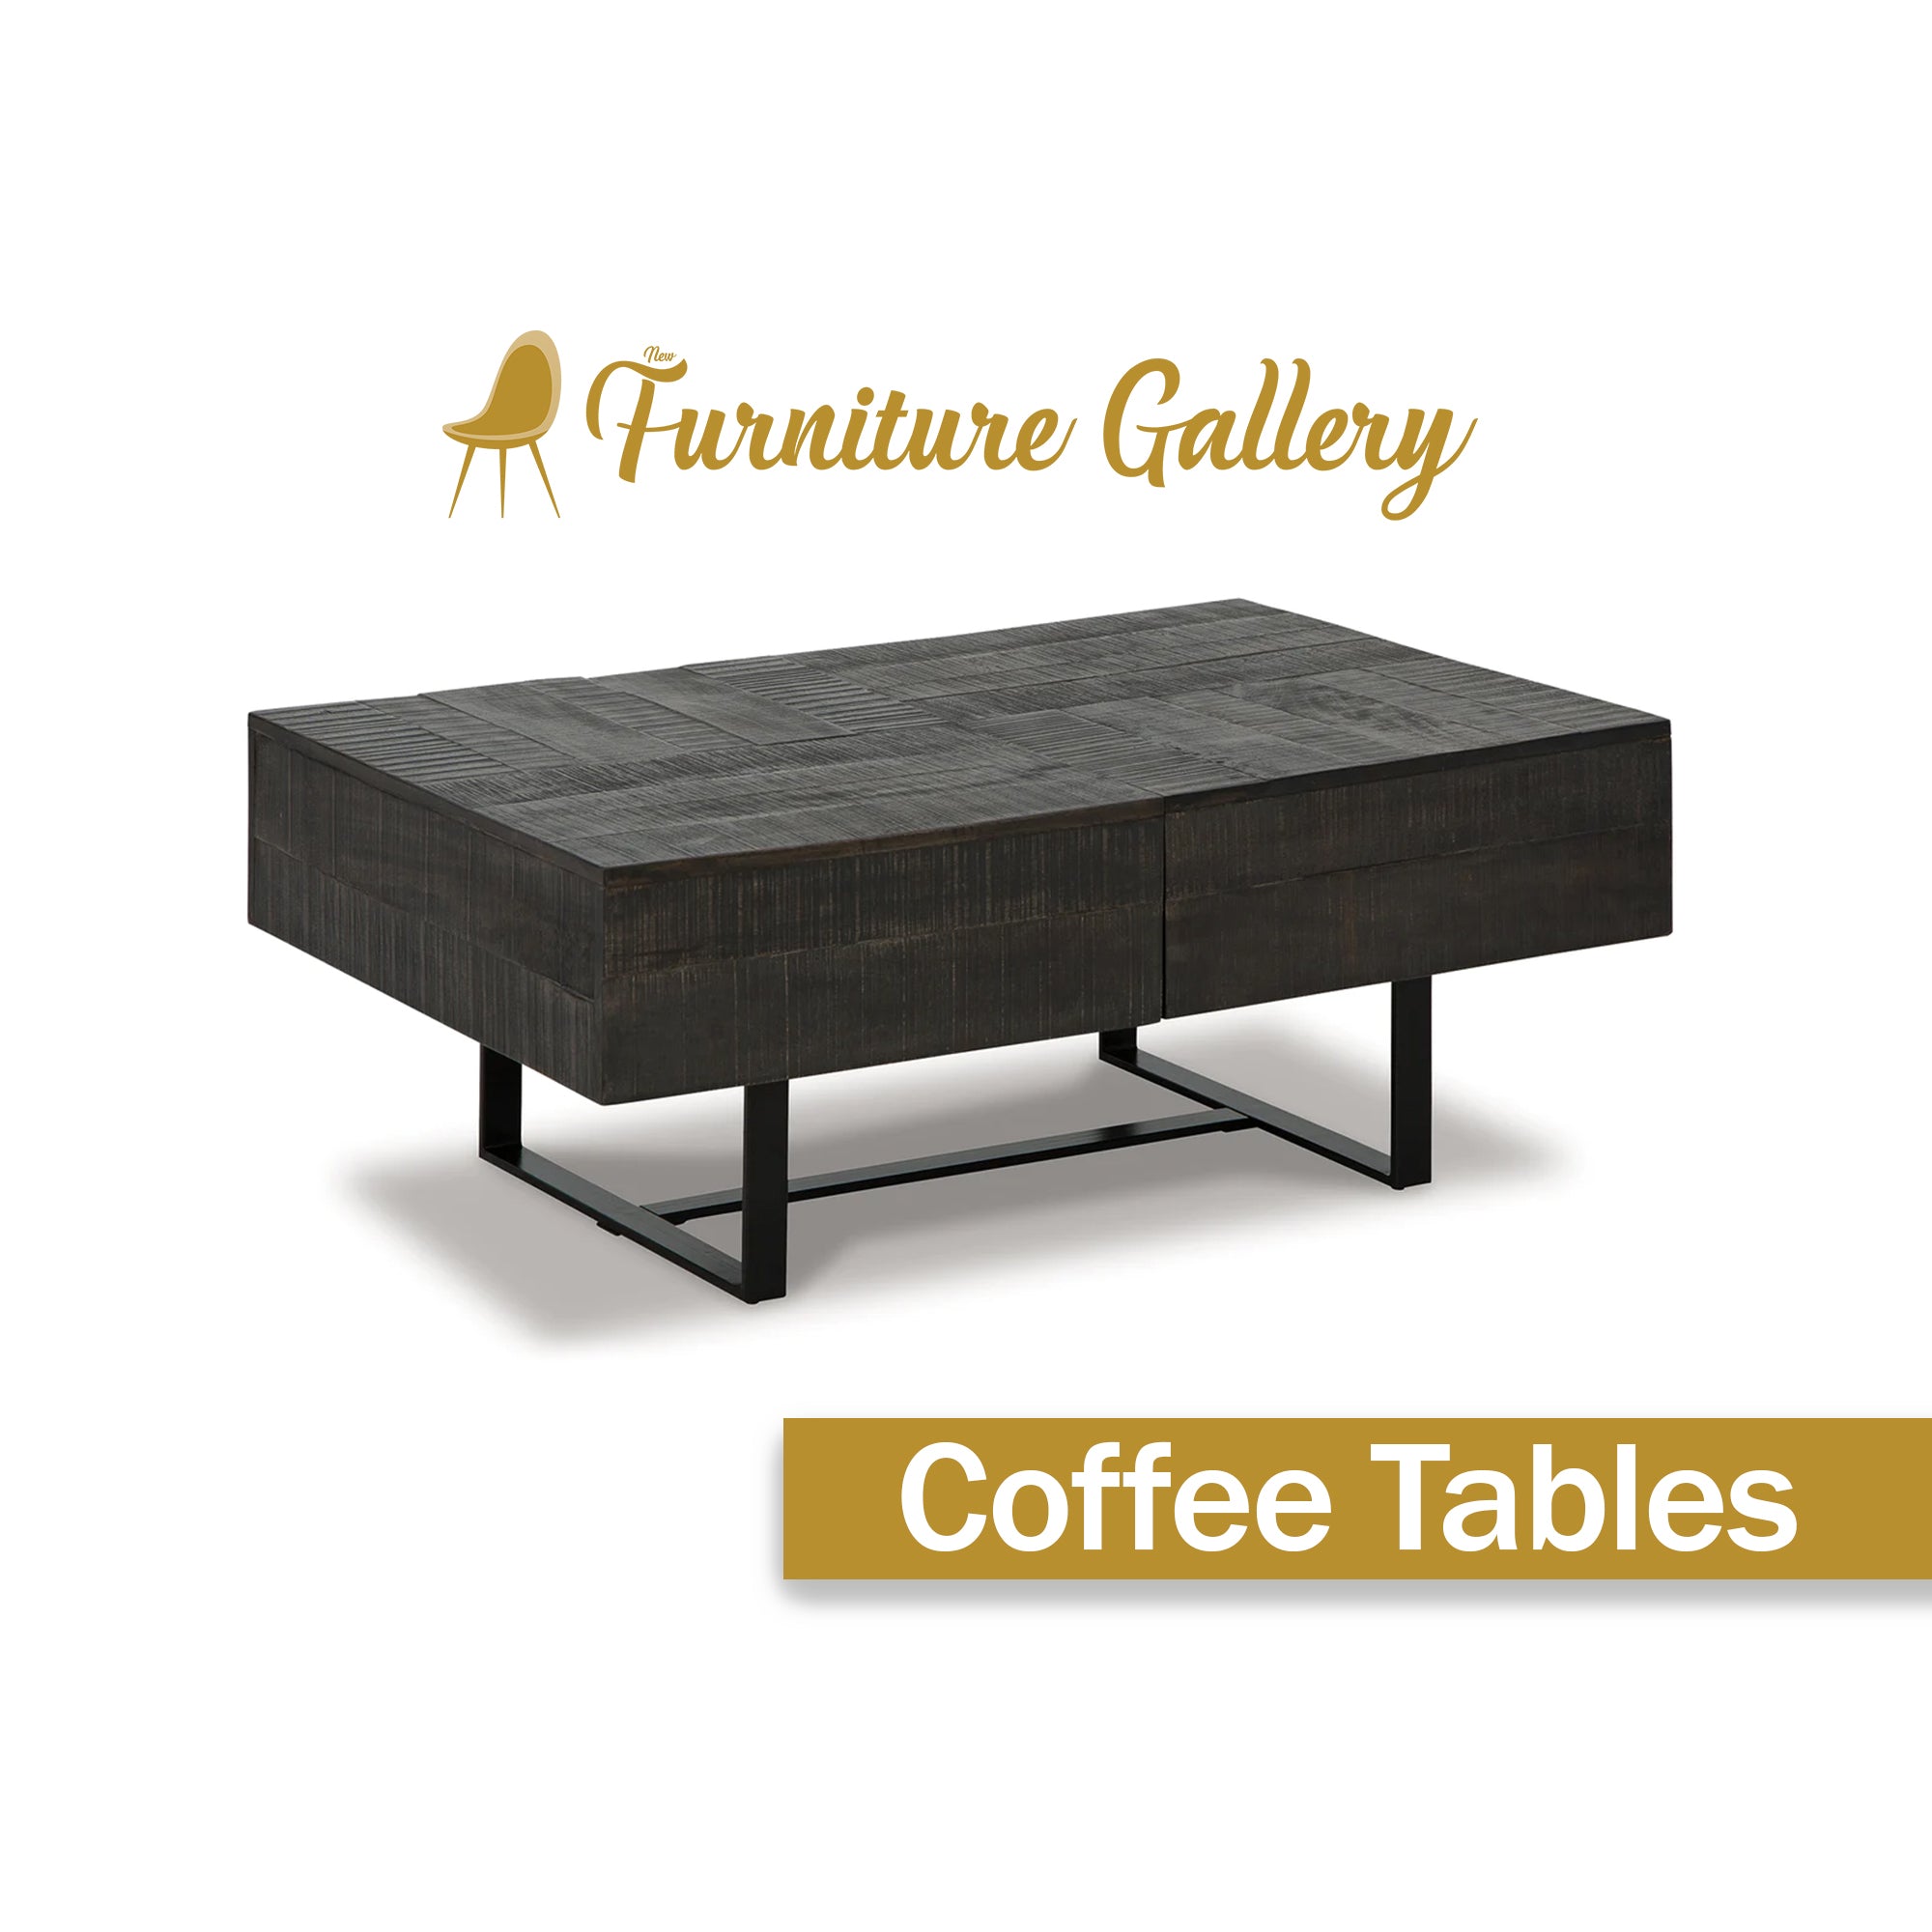 Coffee tables by New Furniture Gallery. New Furniture gallery is a furniture store in Toronto. 